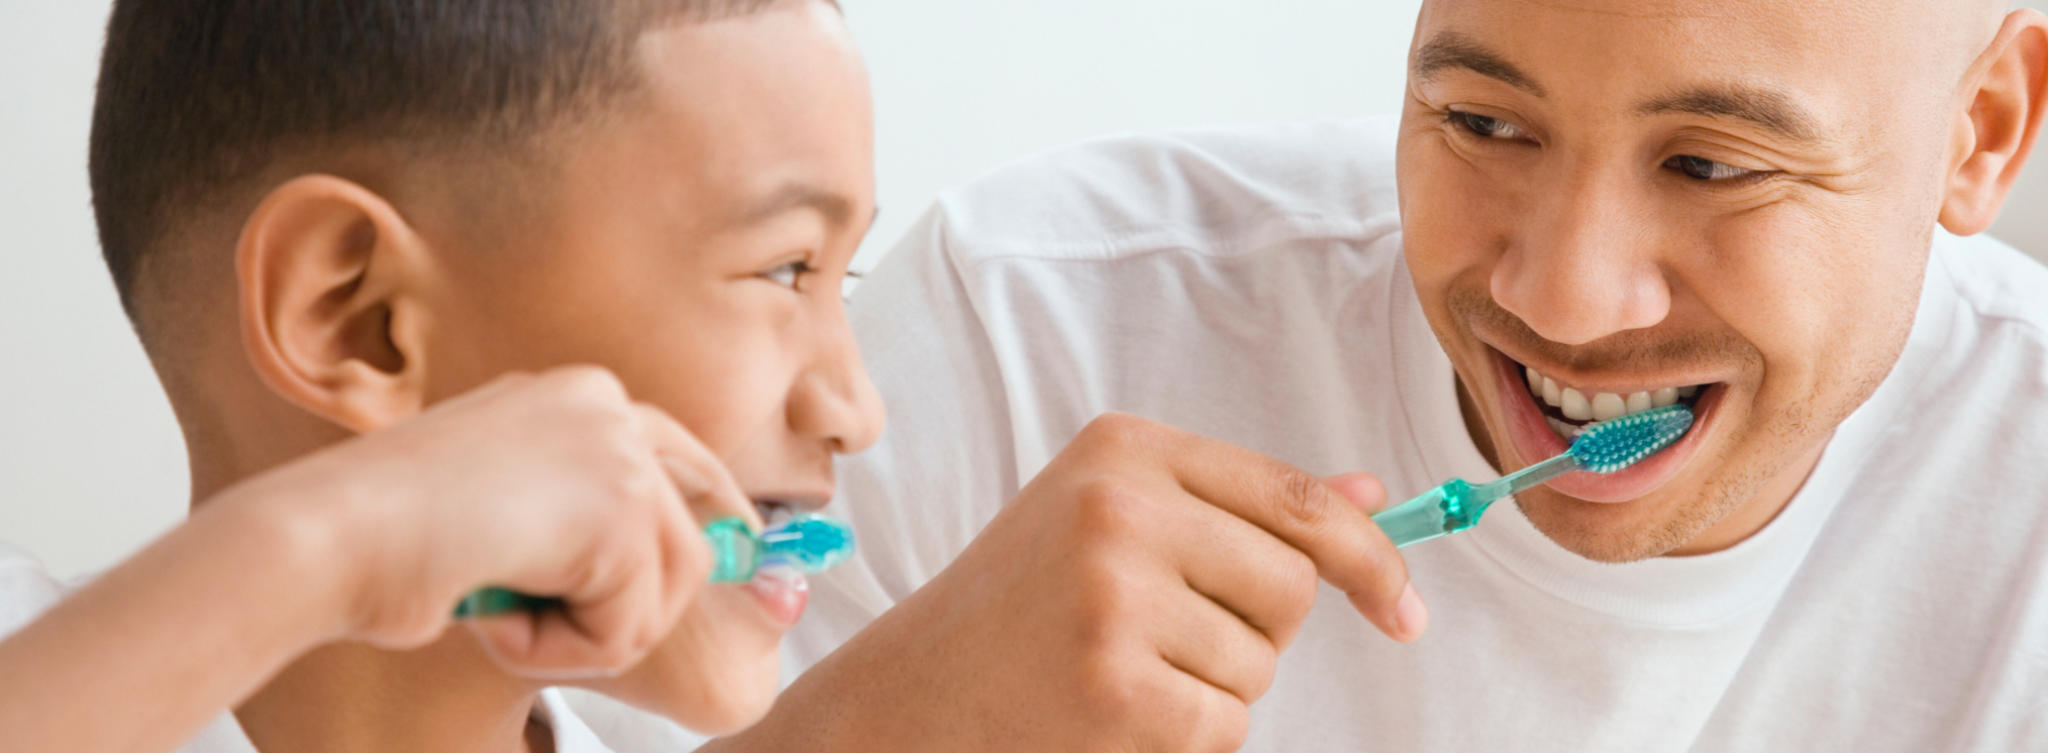 2 Oral Hygiene for a Healthy Mouth at Every Age@2x